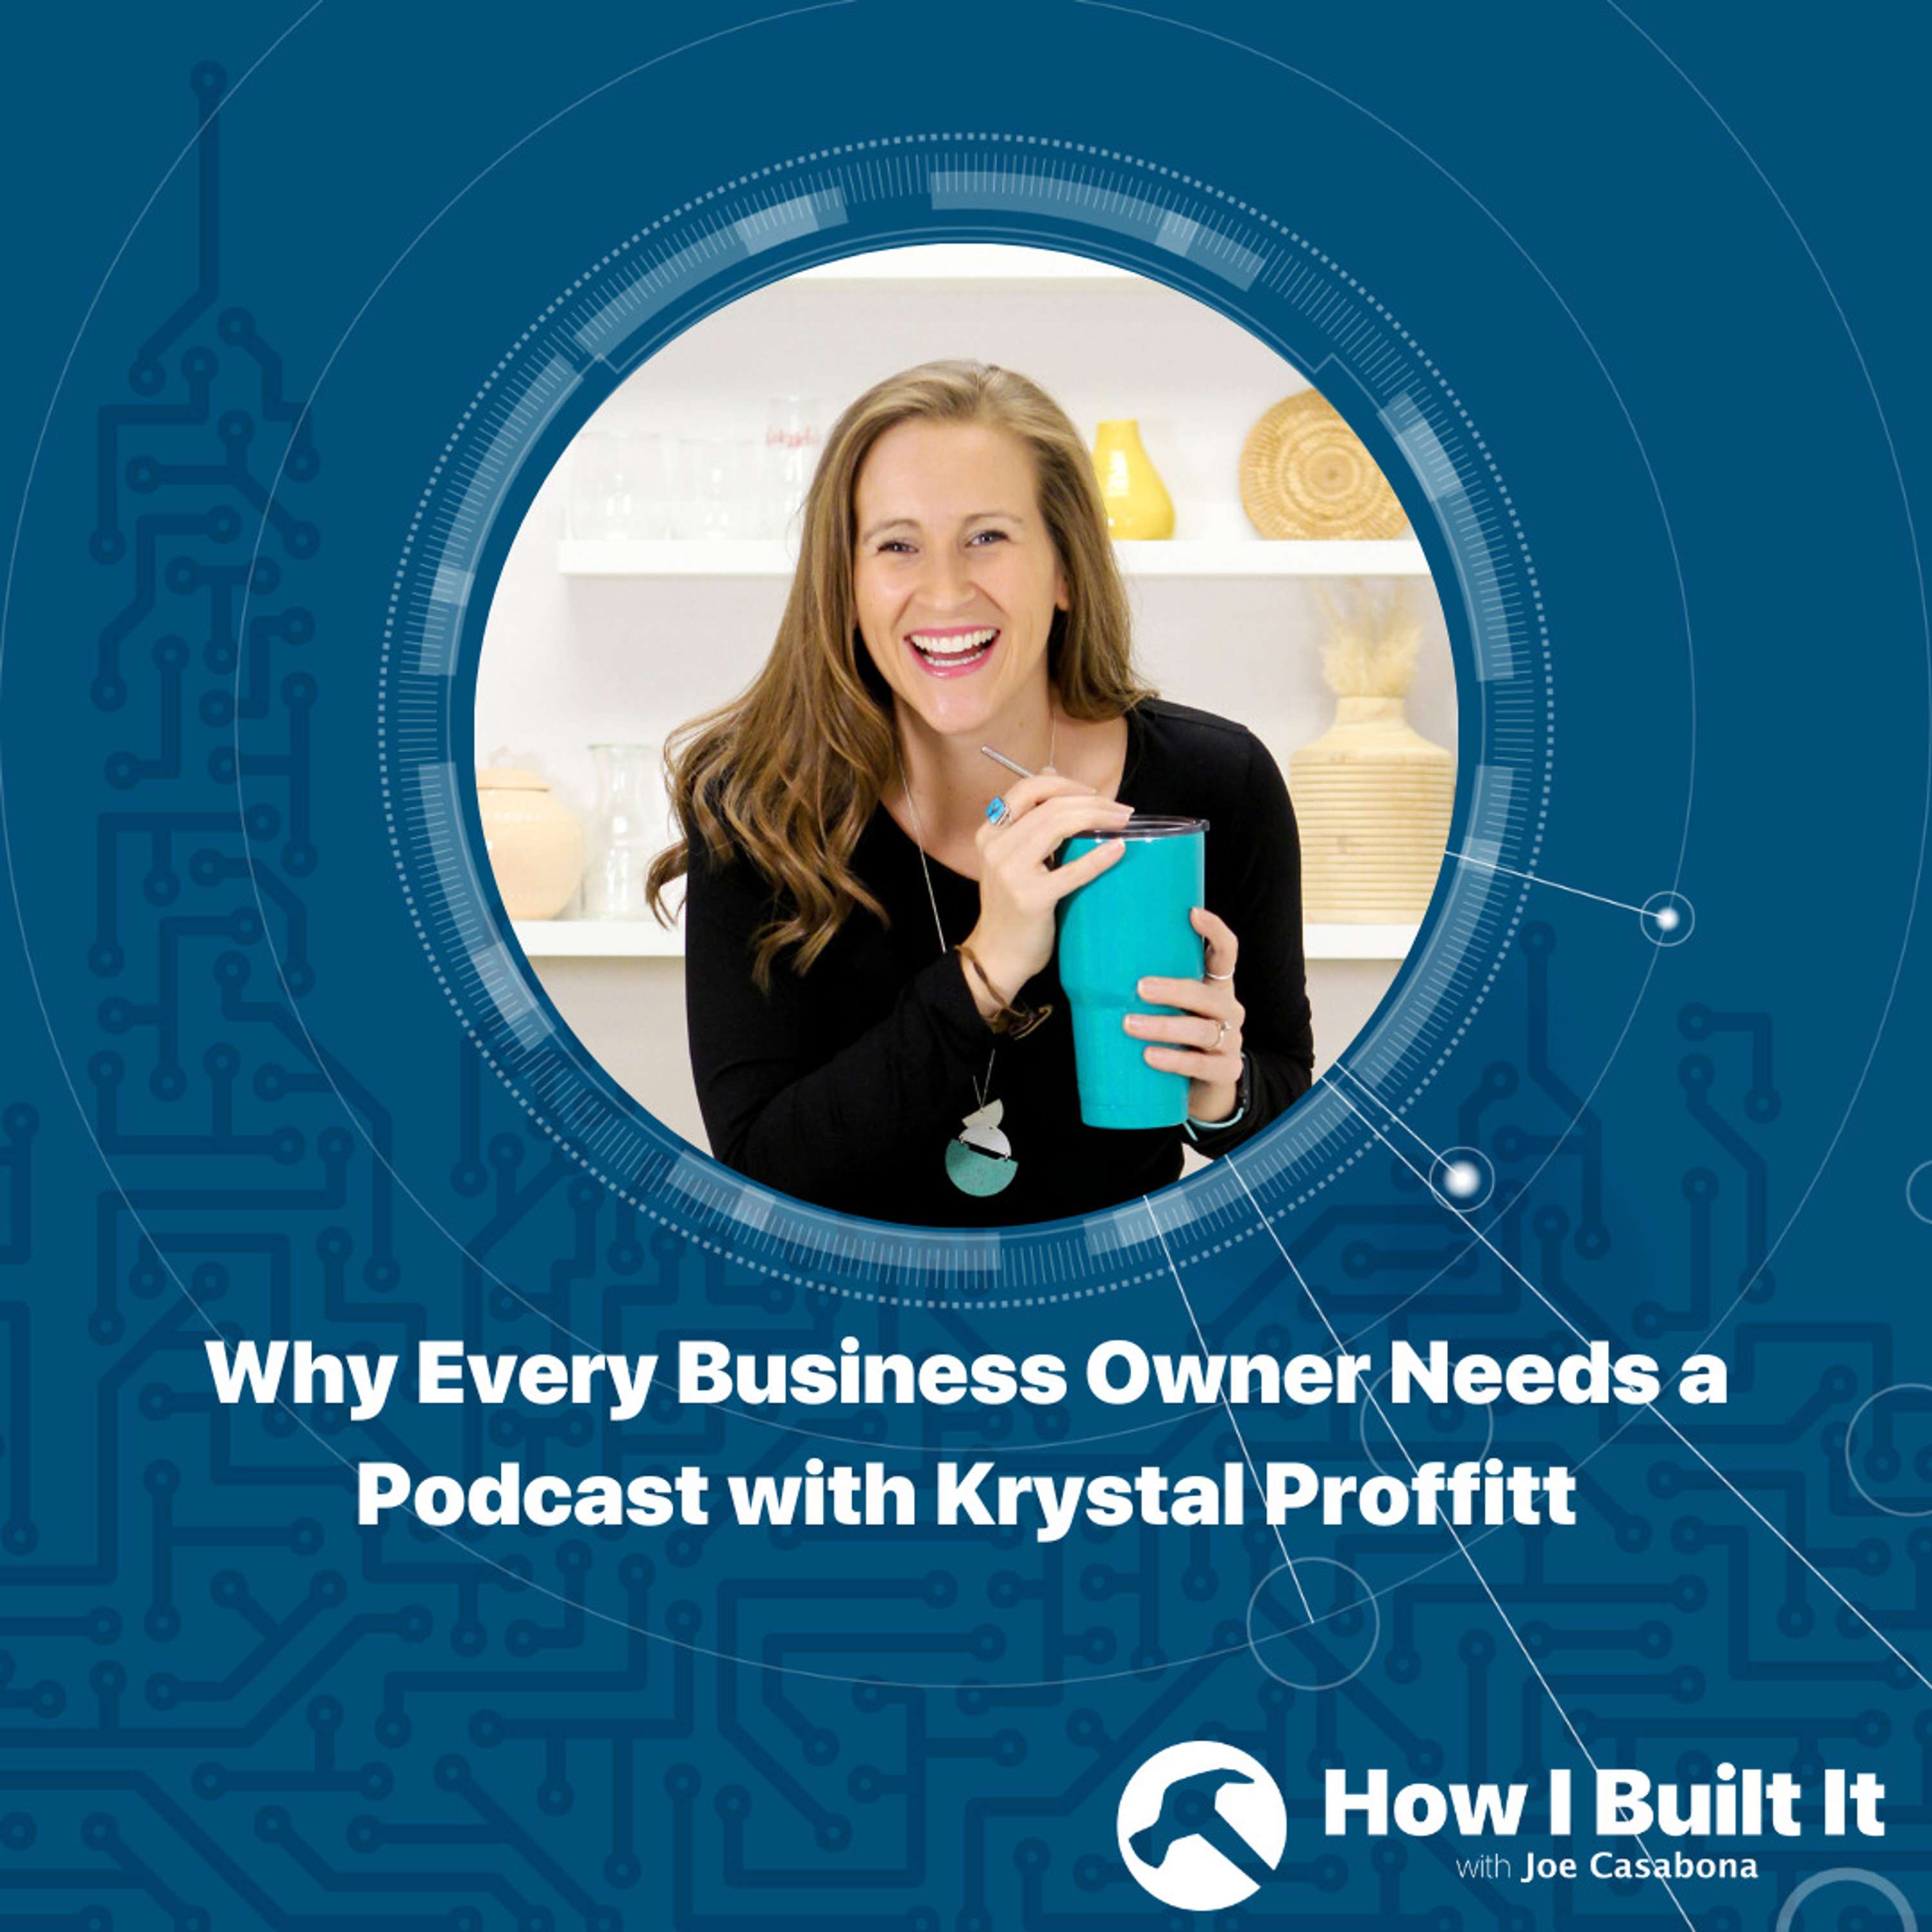 Why Every Business Owner Needs a Podcast with Krystal Proffitt